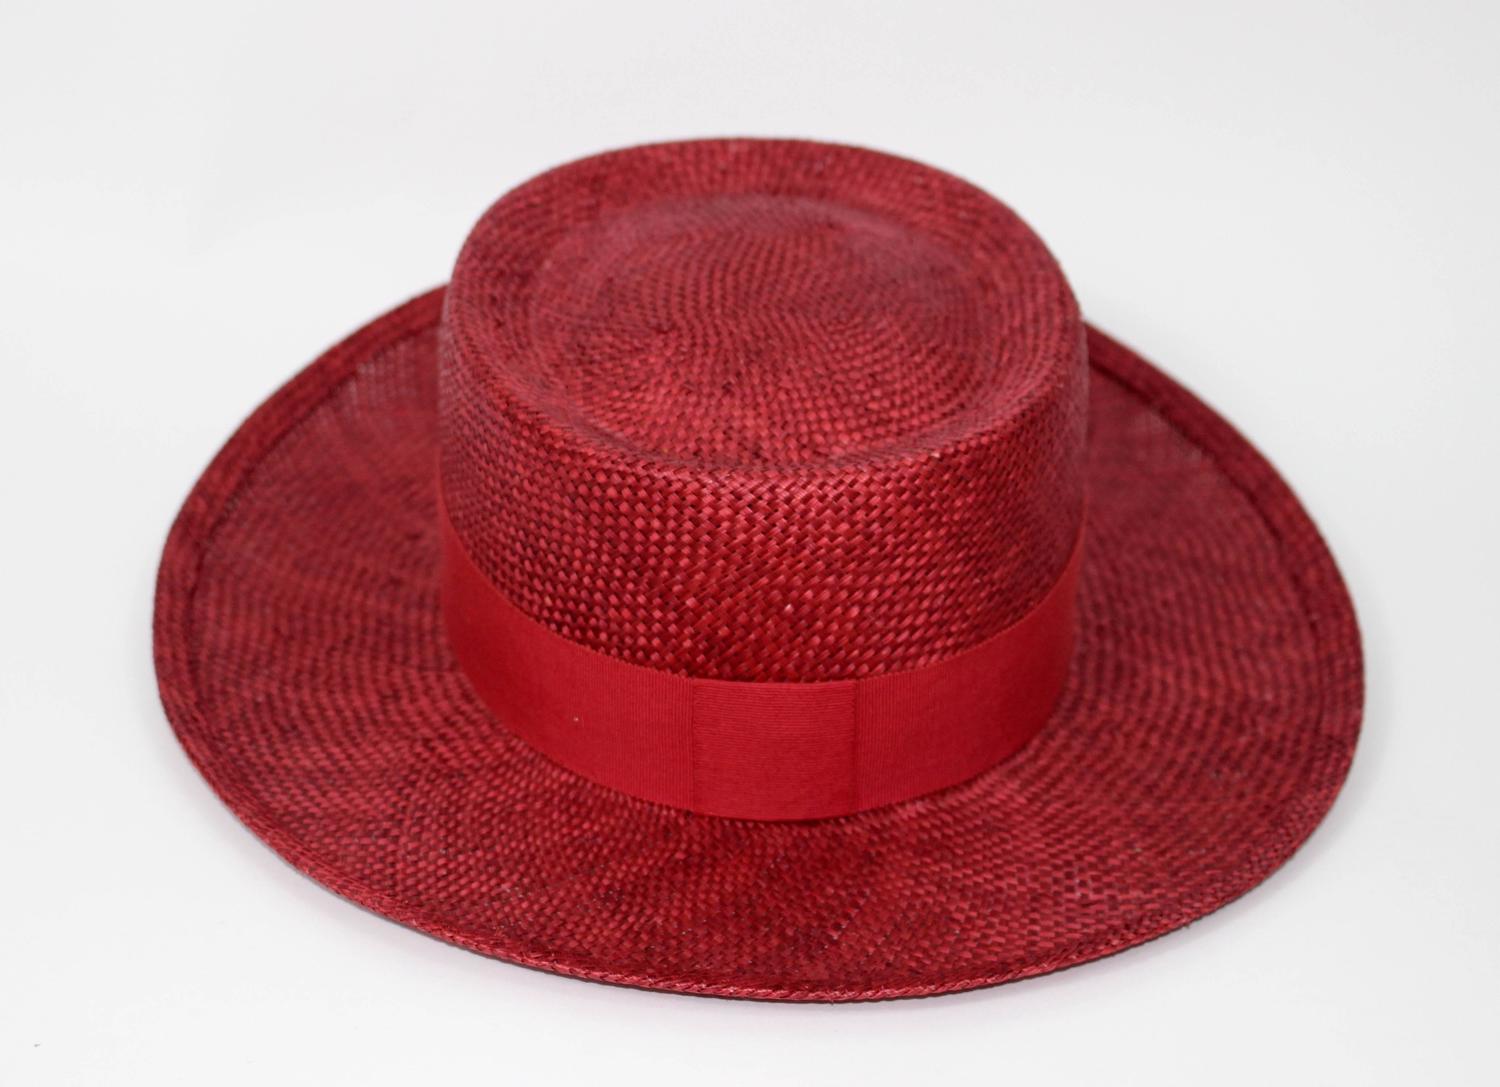 Vintage Chanel Cherry Red Straw Hat For Sale at 1stdibs